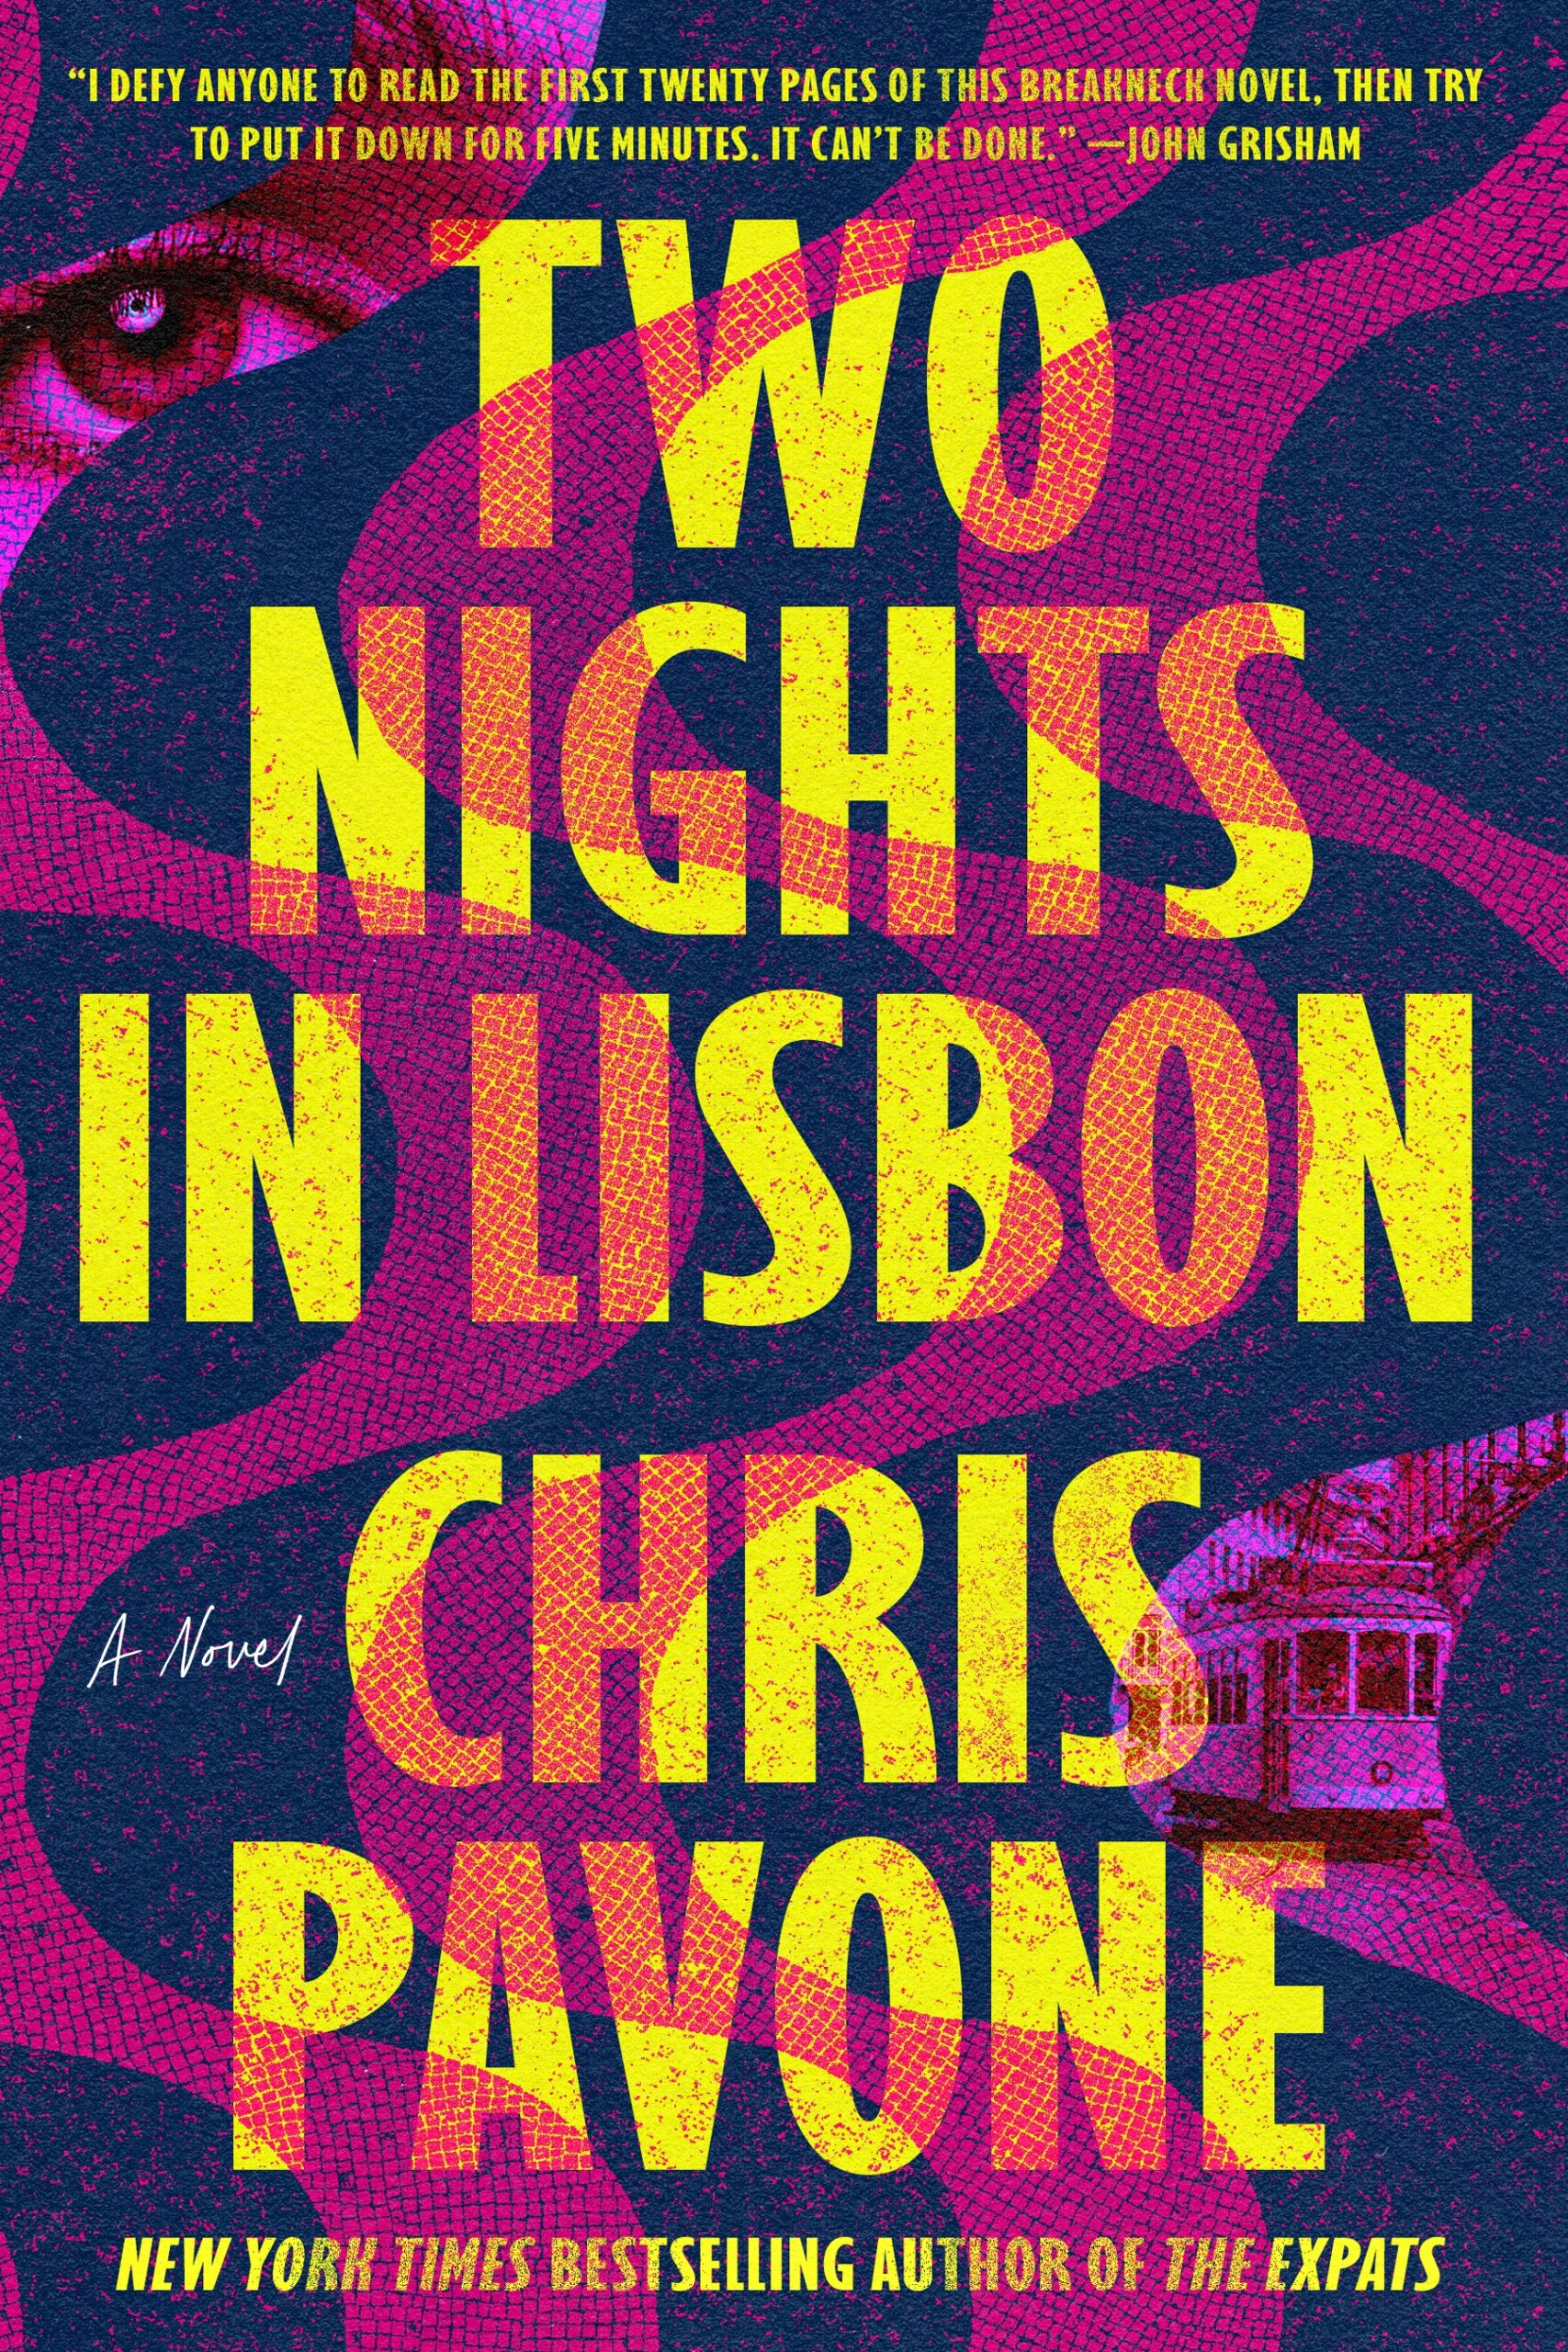 Chris Pavone's Two Nights in Lisbon book cover